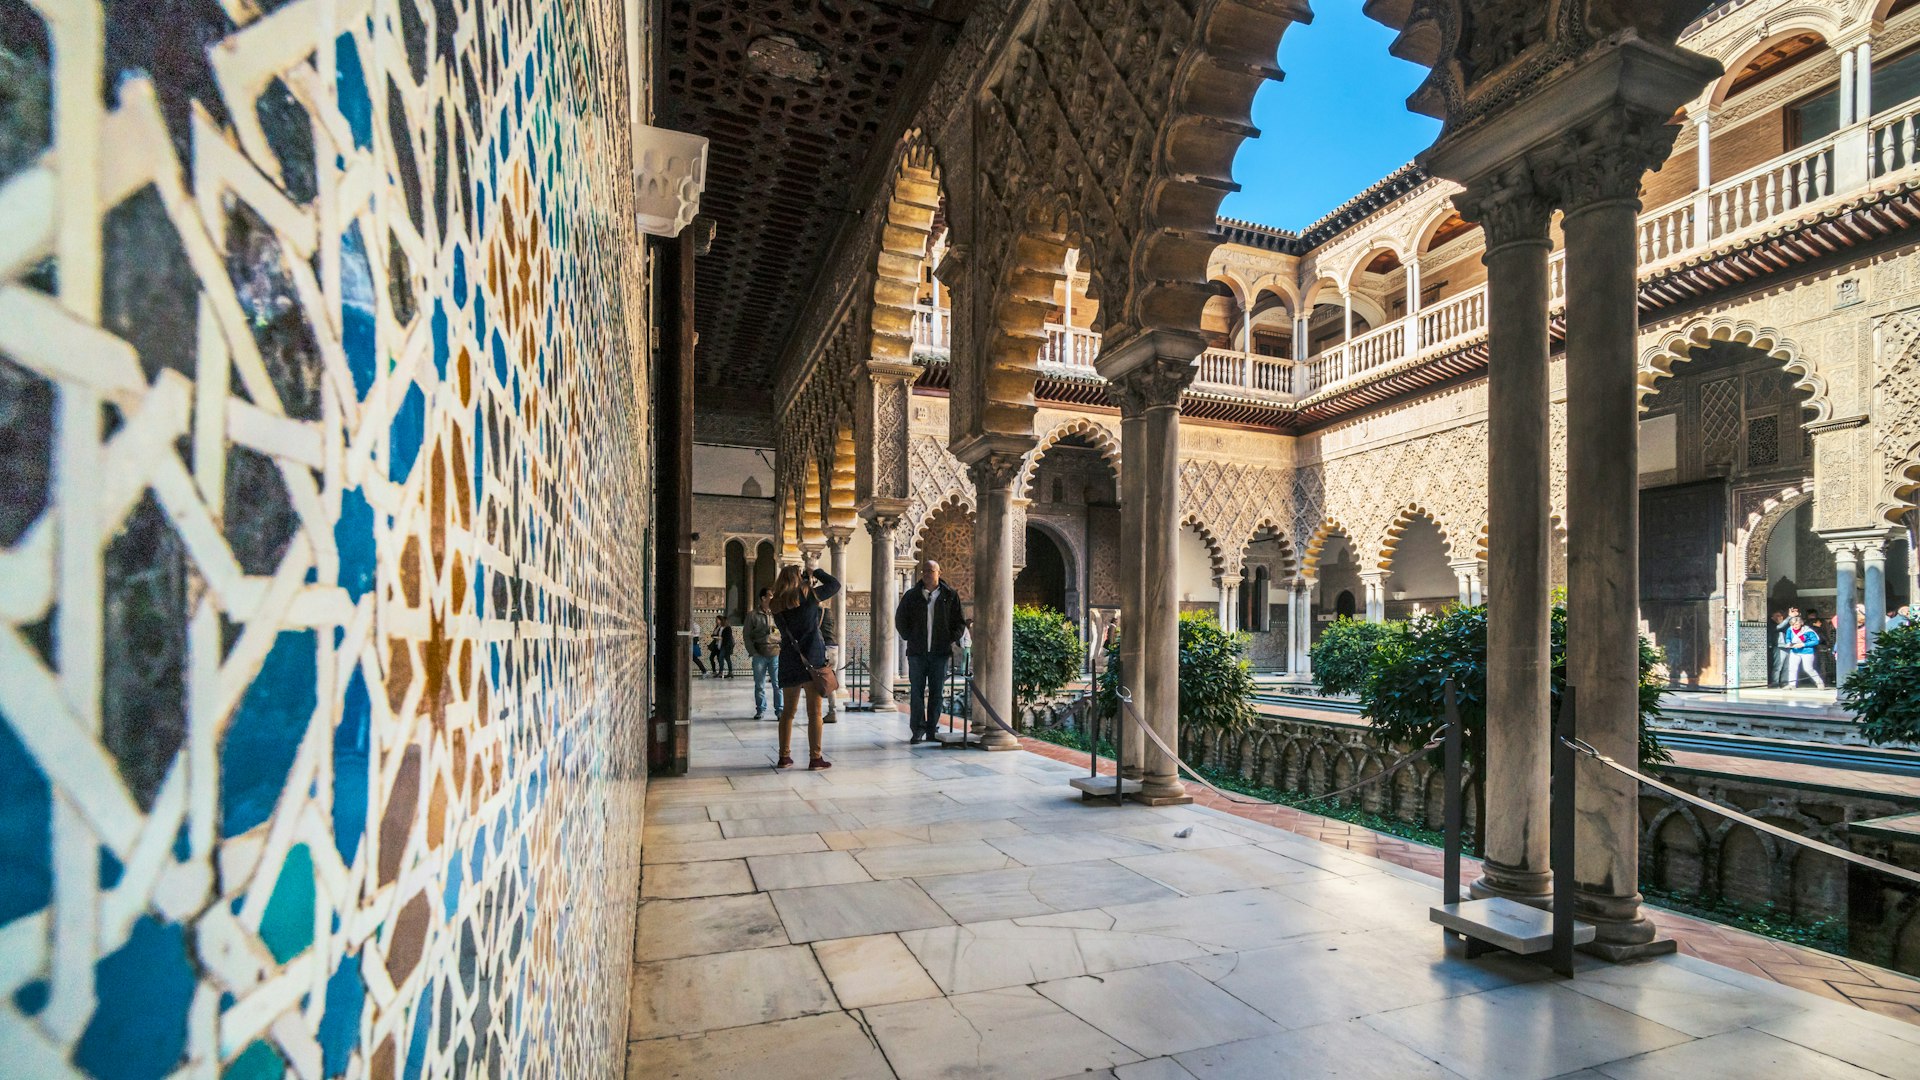 Tiled wall in the Courtyard of the Maidens in the Alcazar of Seville